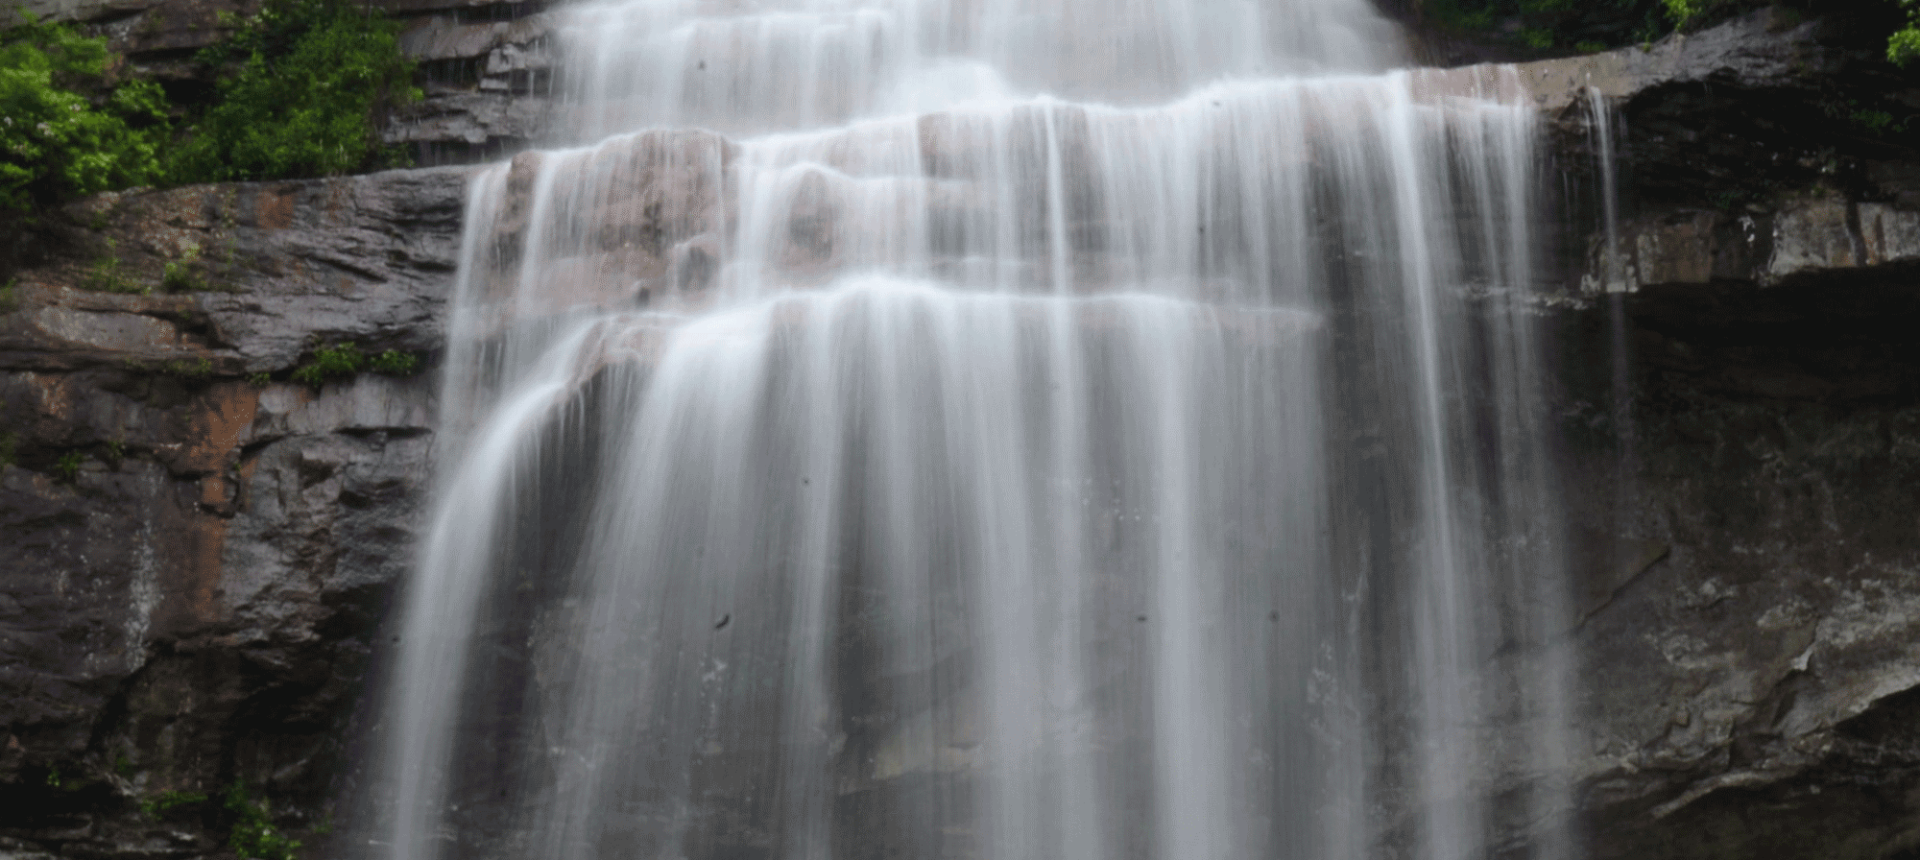 a close up view of water flowing down a water fall